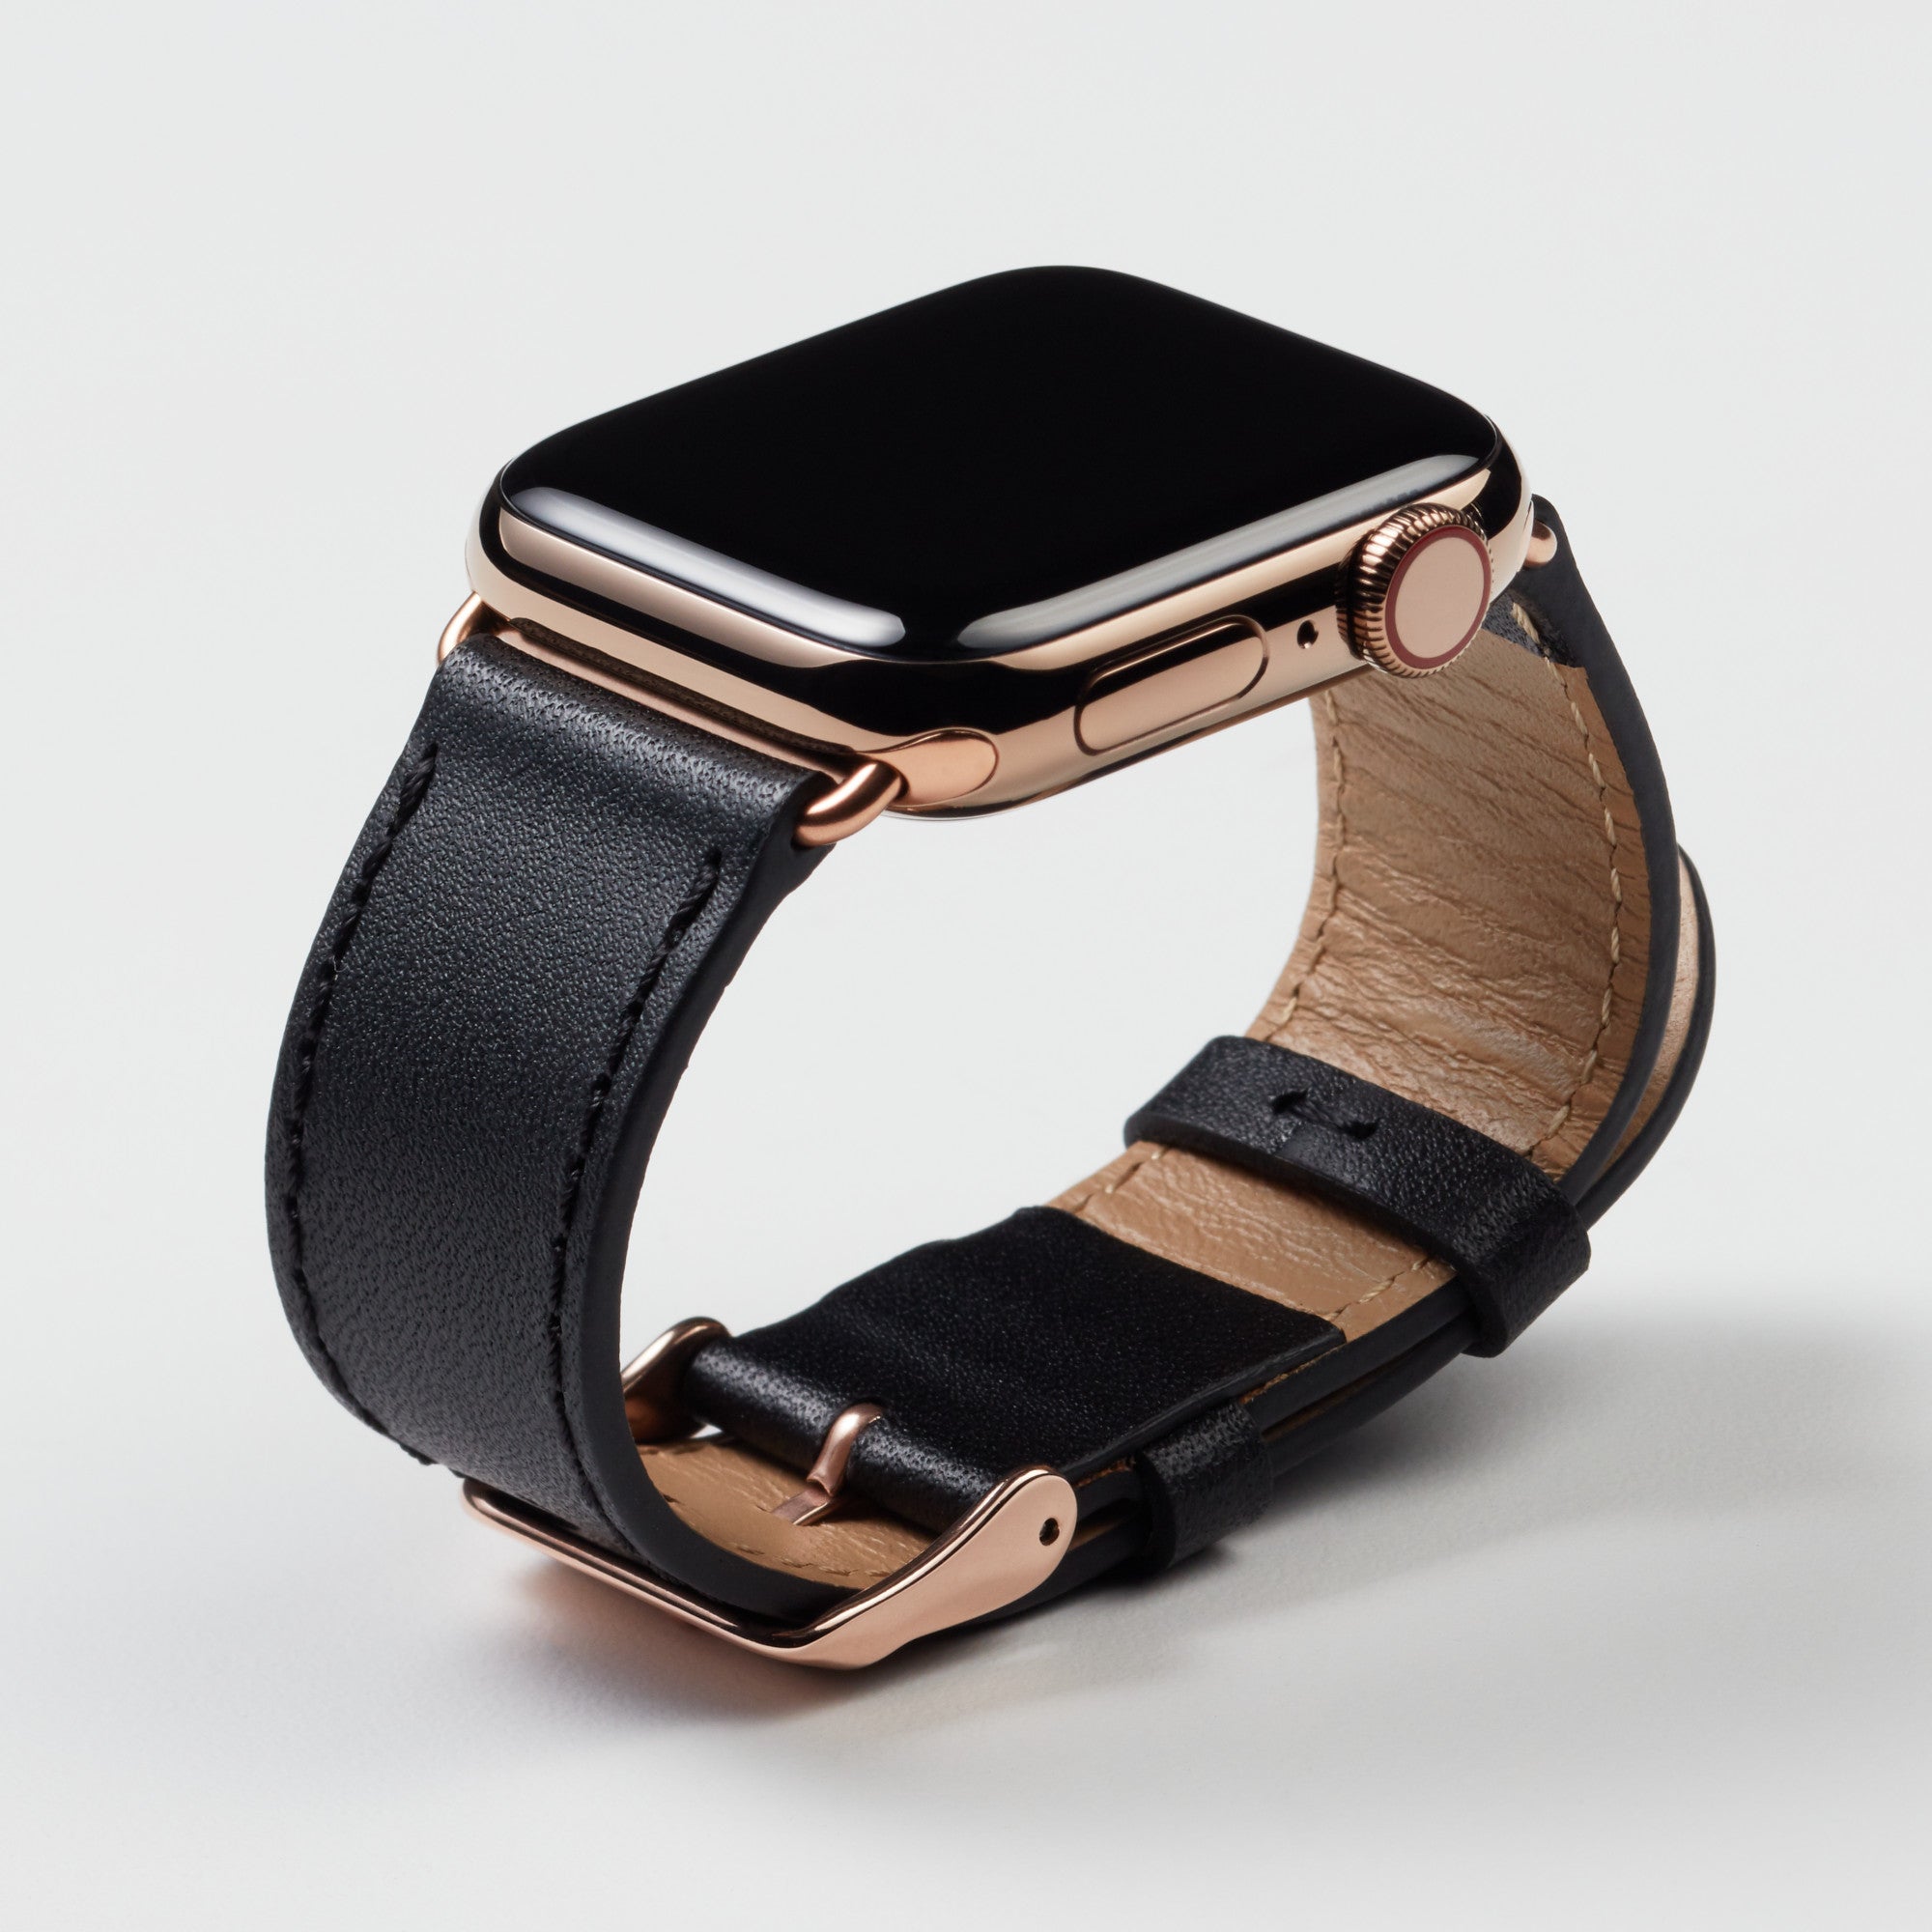 Vegan Leather Apple watch band with black rivets